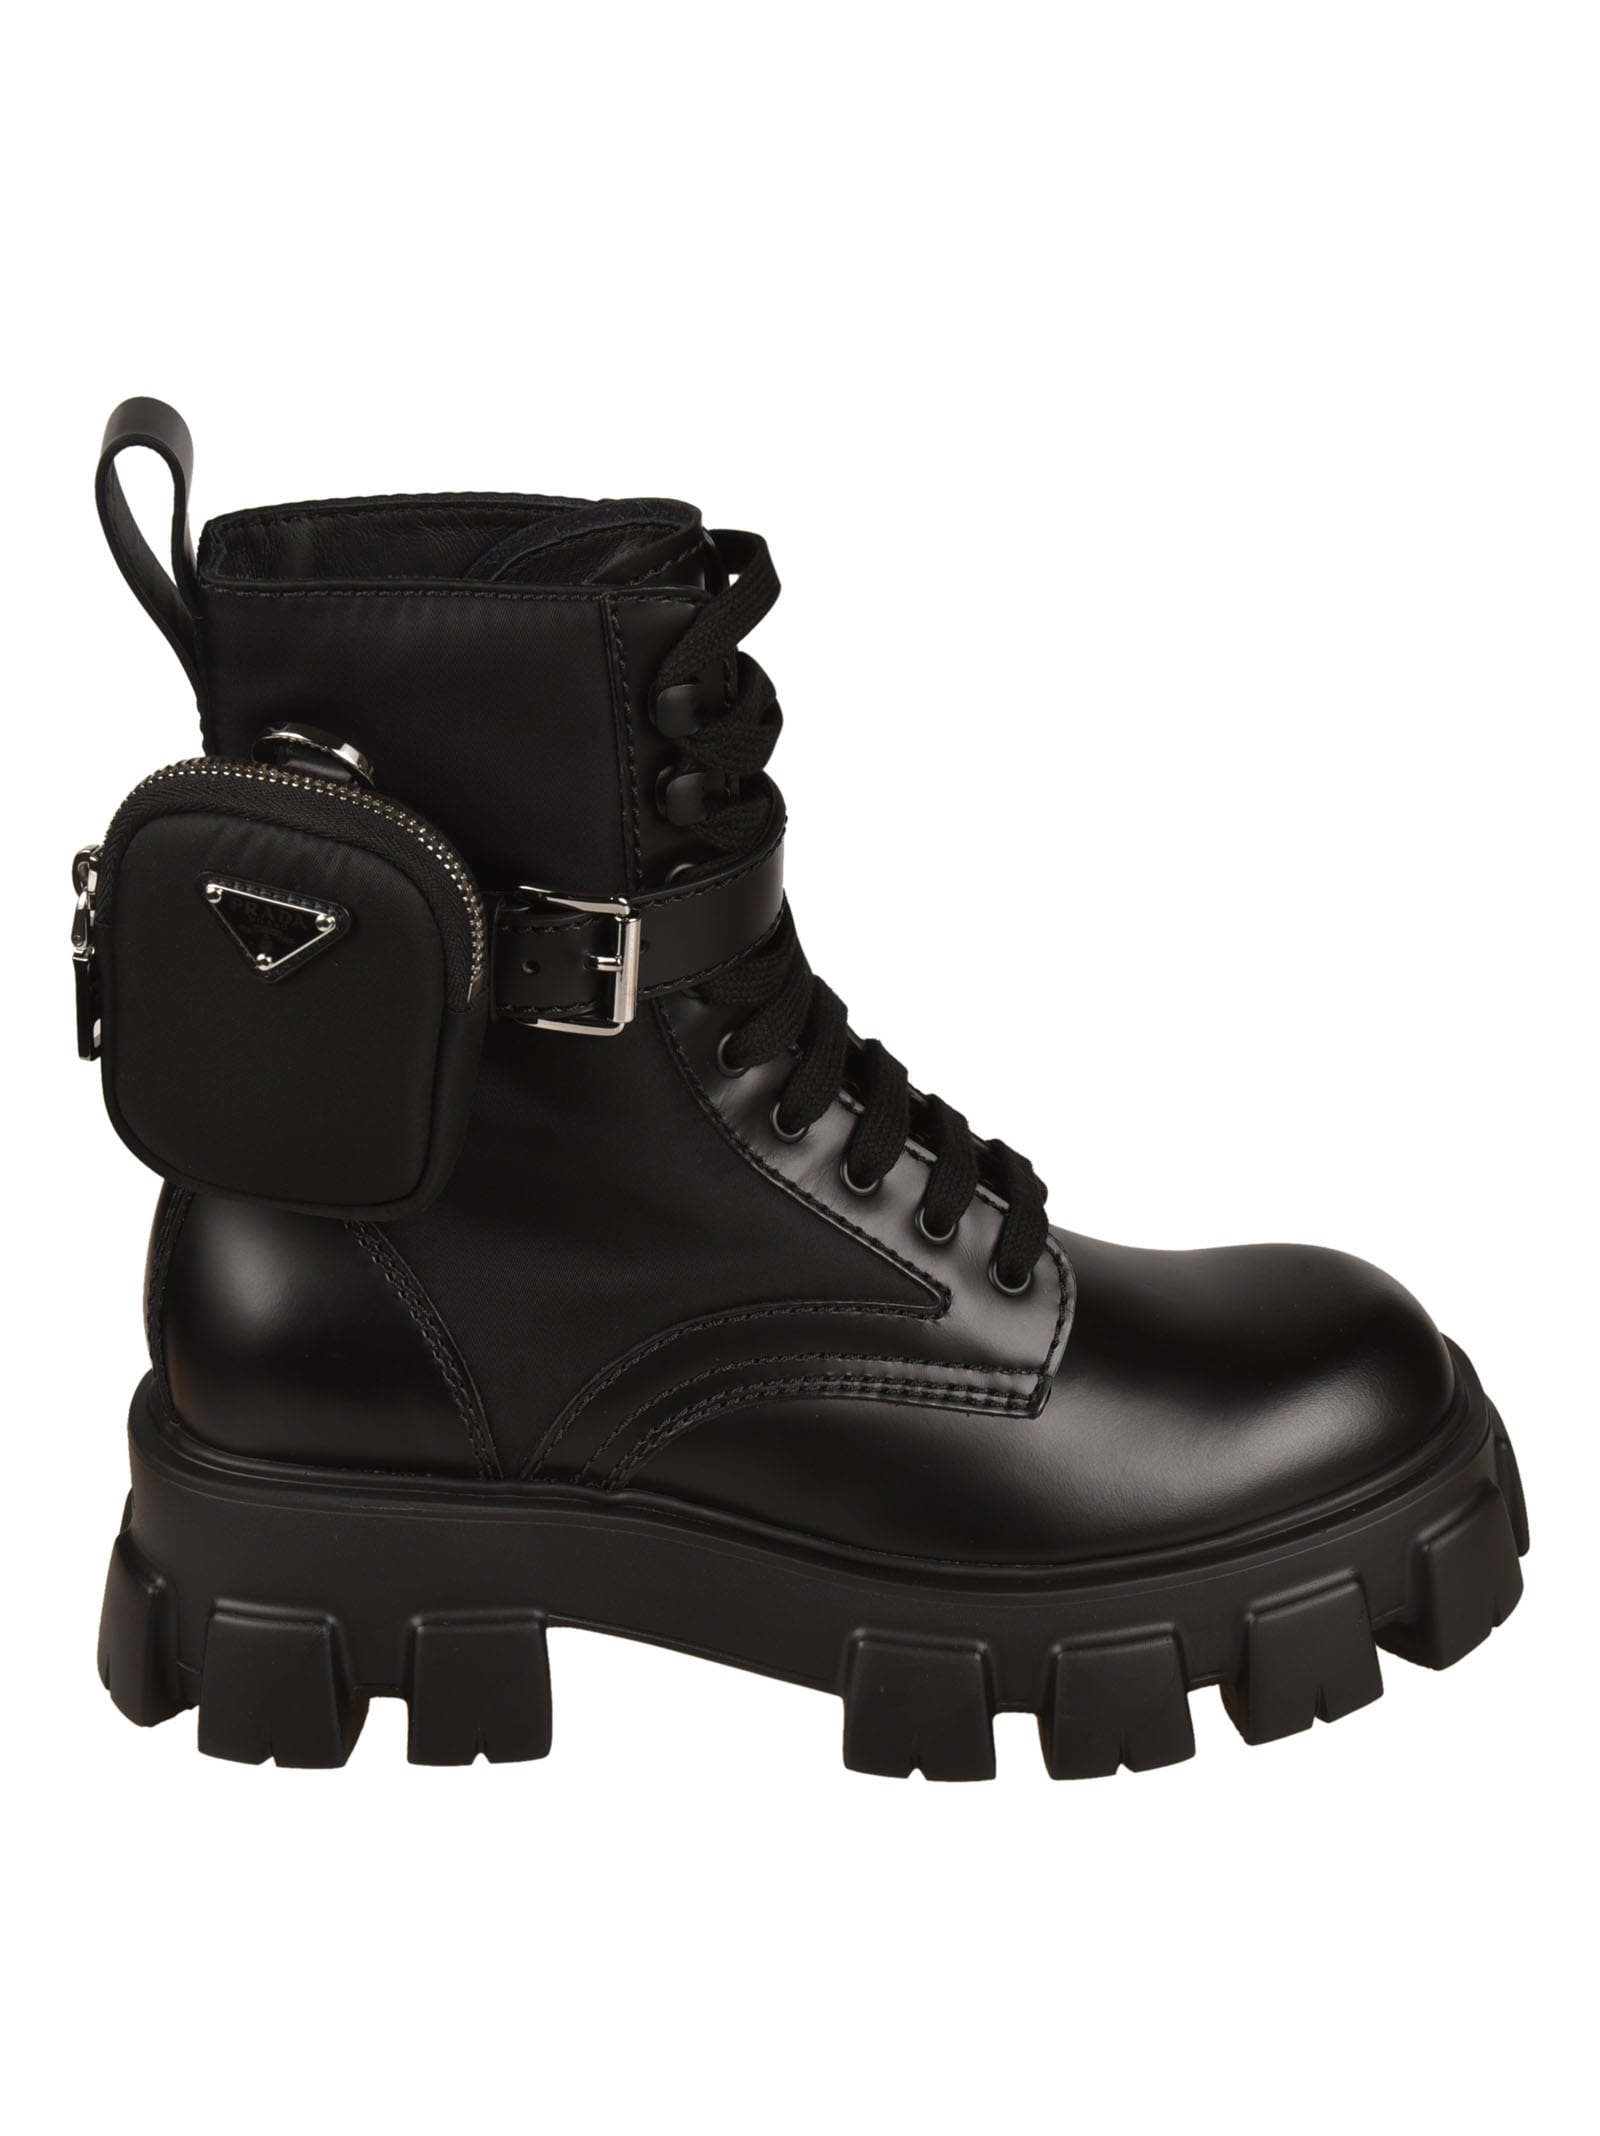 Prada Strapped Pouch Combat Boots